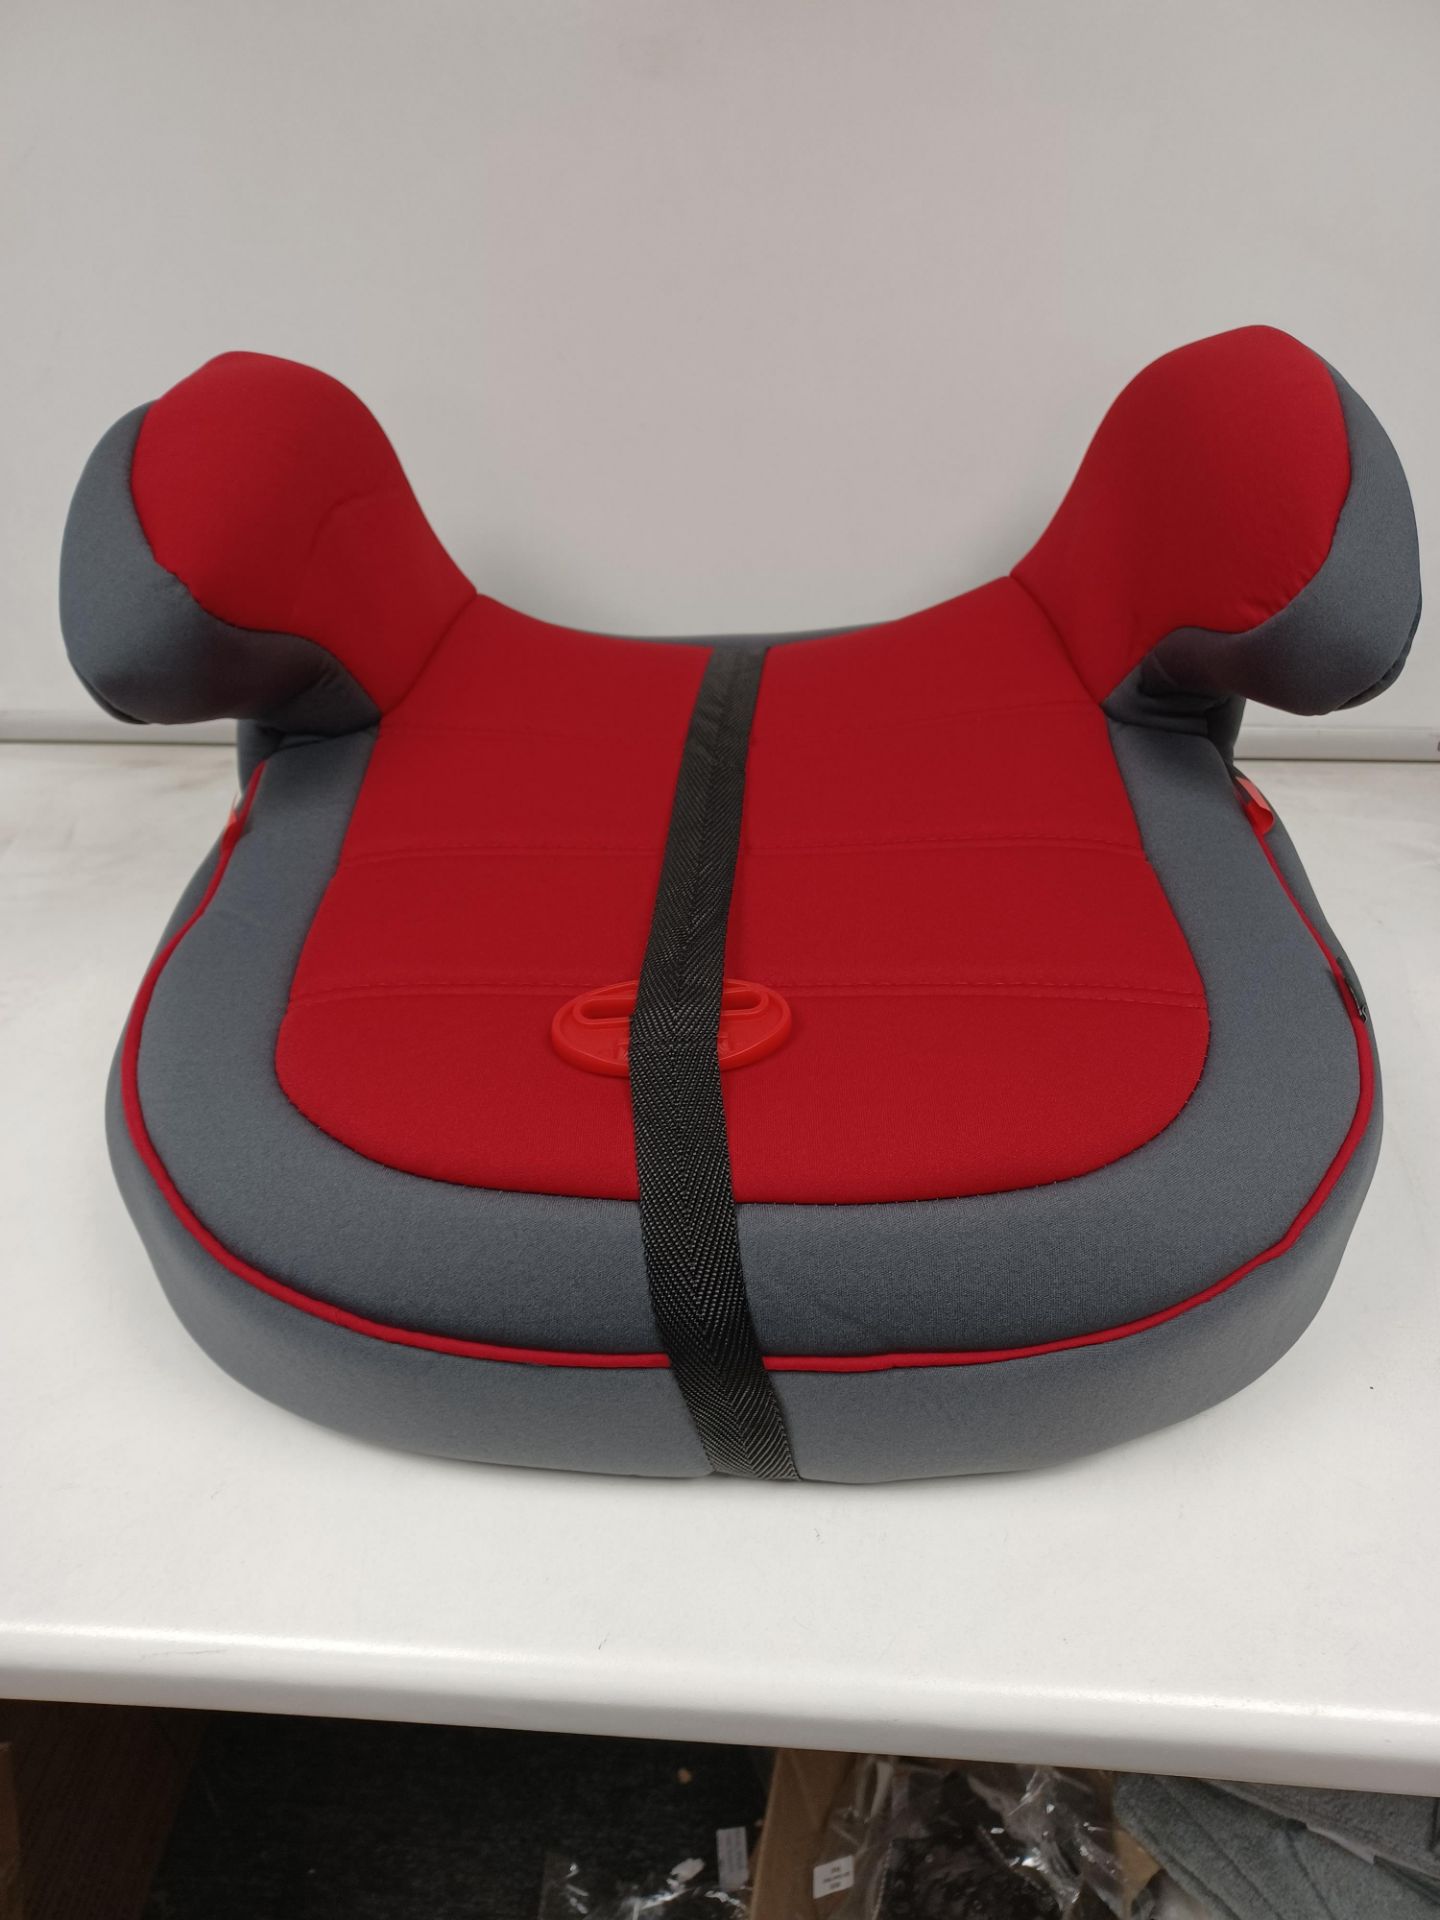 4 X NEW PACKAGED MOTHERCARE DREAM BOOTER SEATS. GREY/RED. RRP £70 EACH. ROW 3